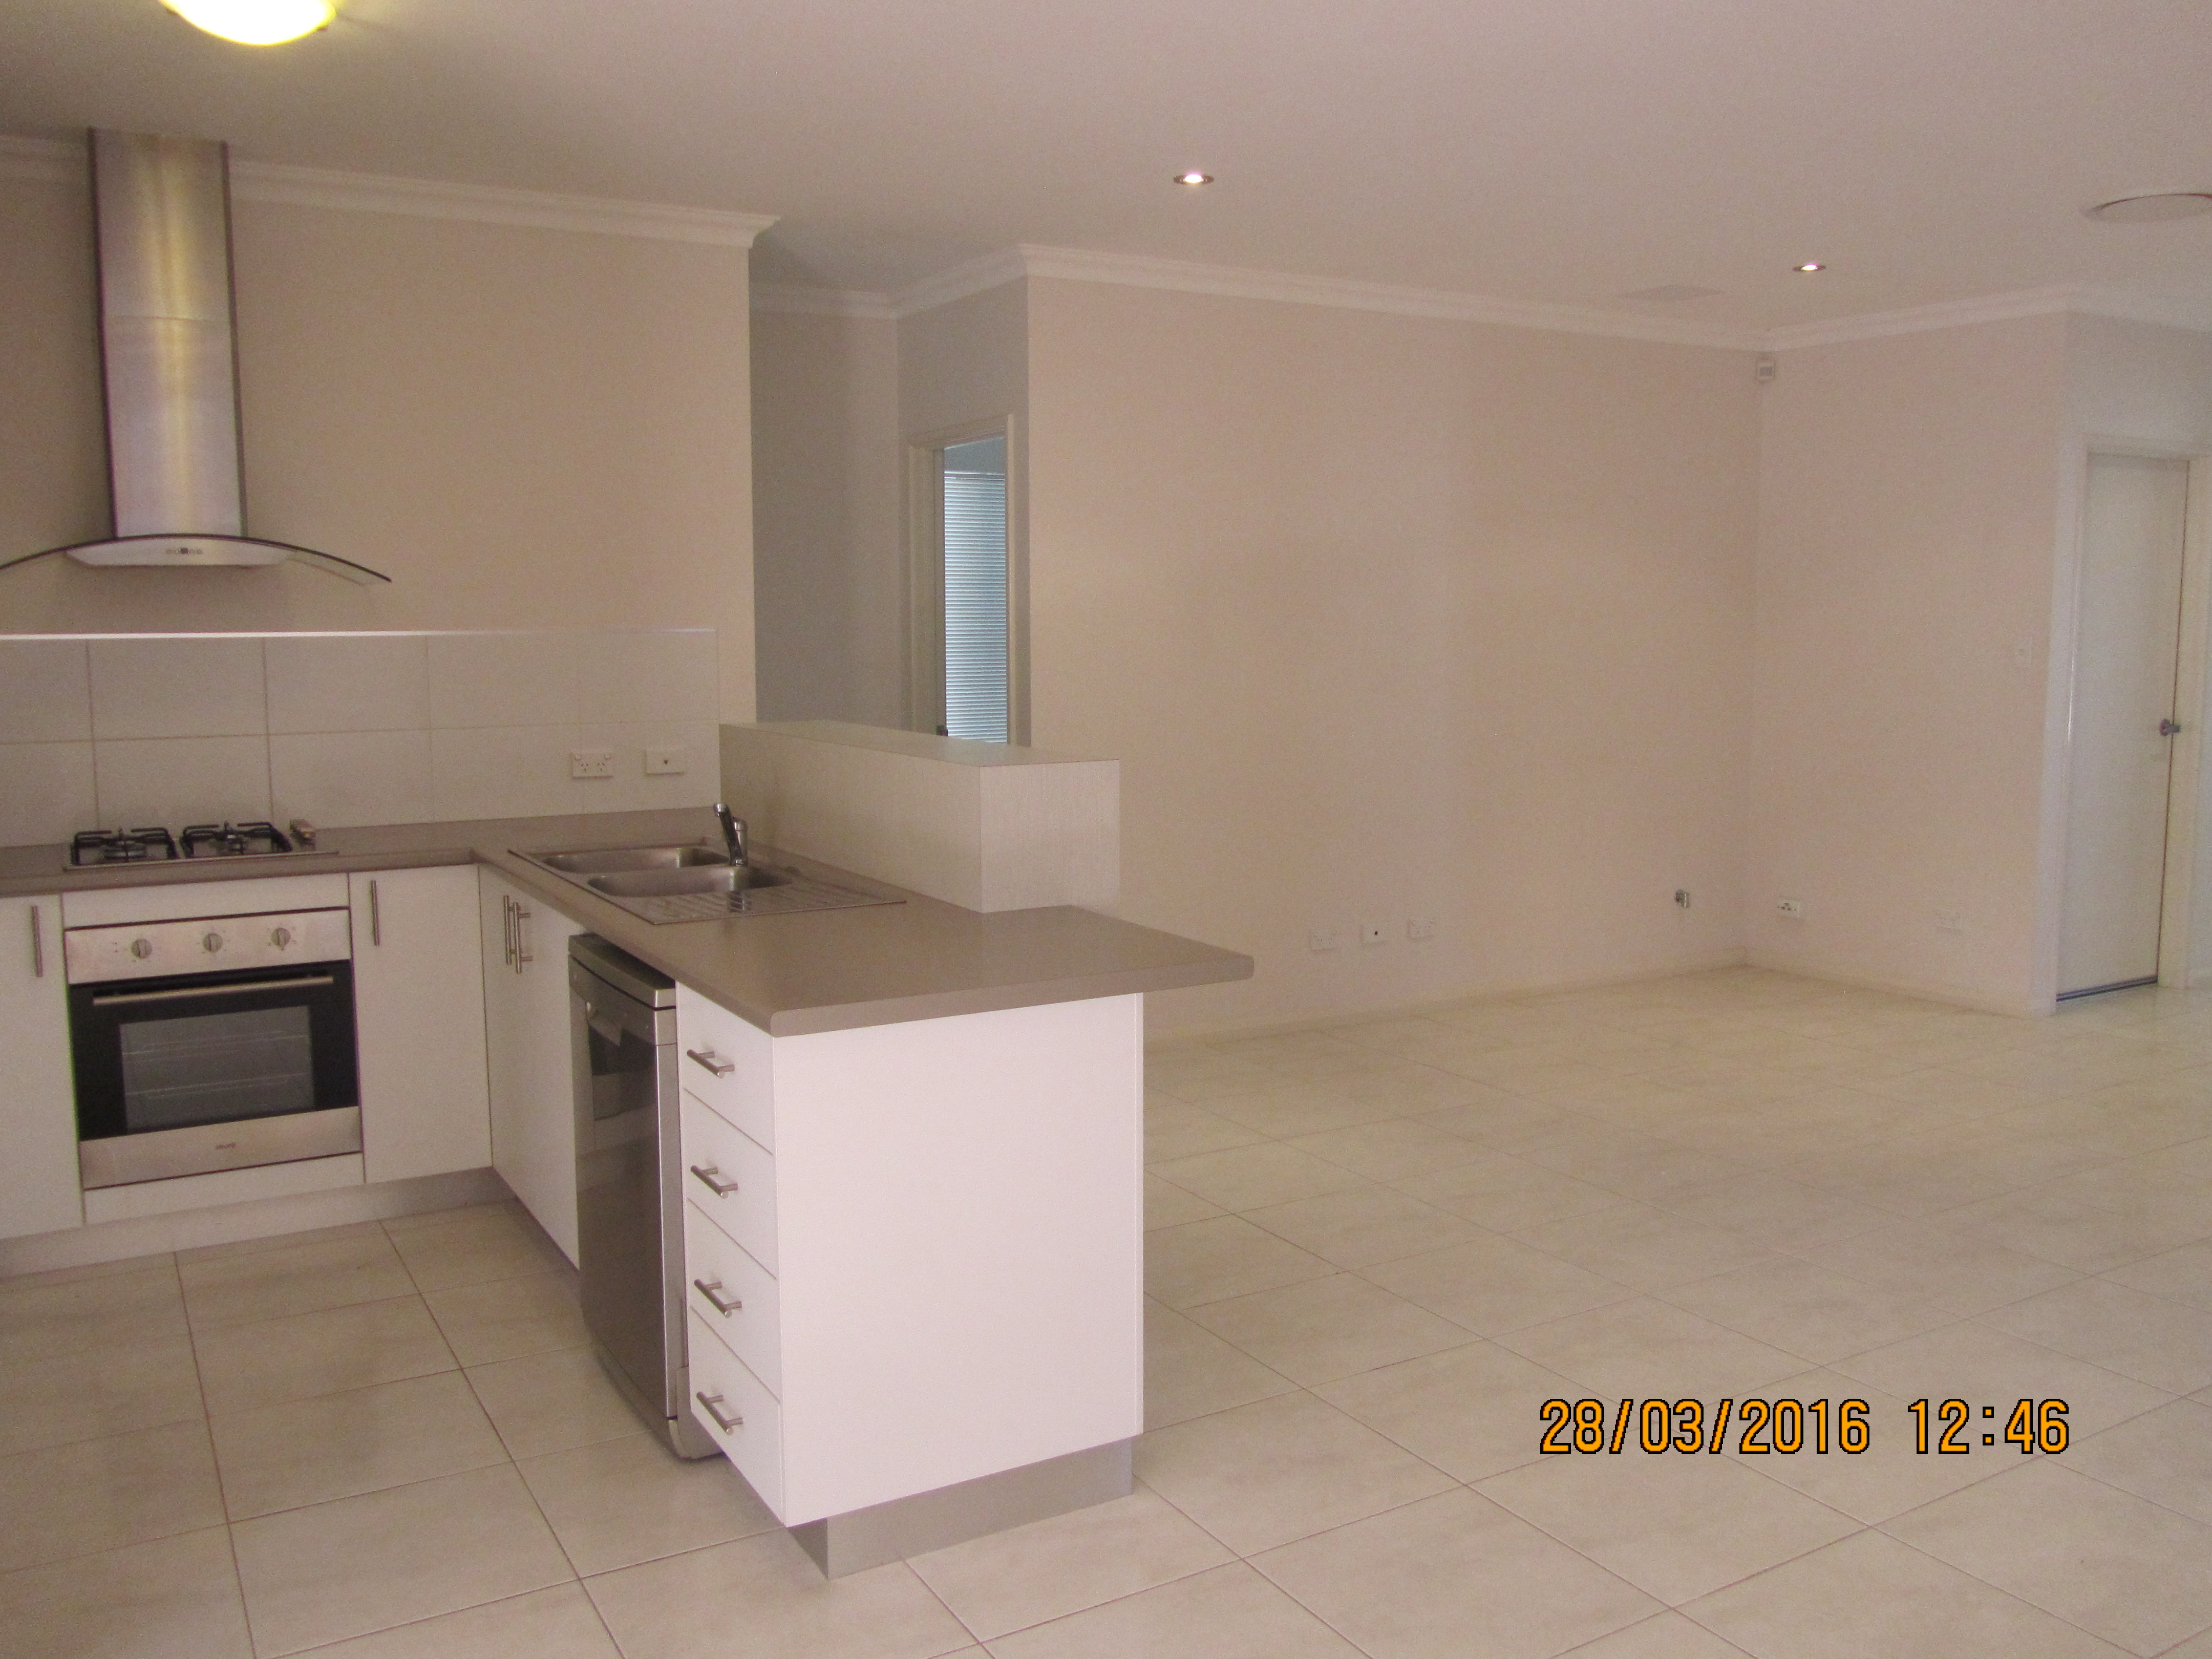 16a Matta Way Pearsall 6065 Wa House For Rent Rent Com Au